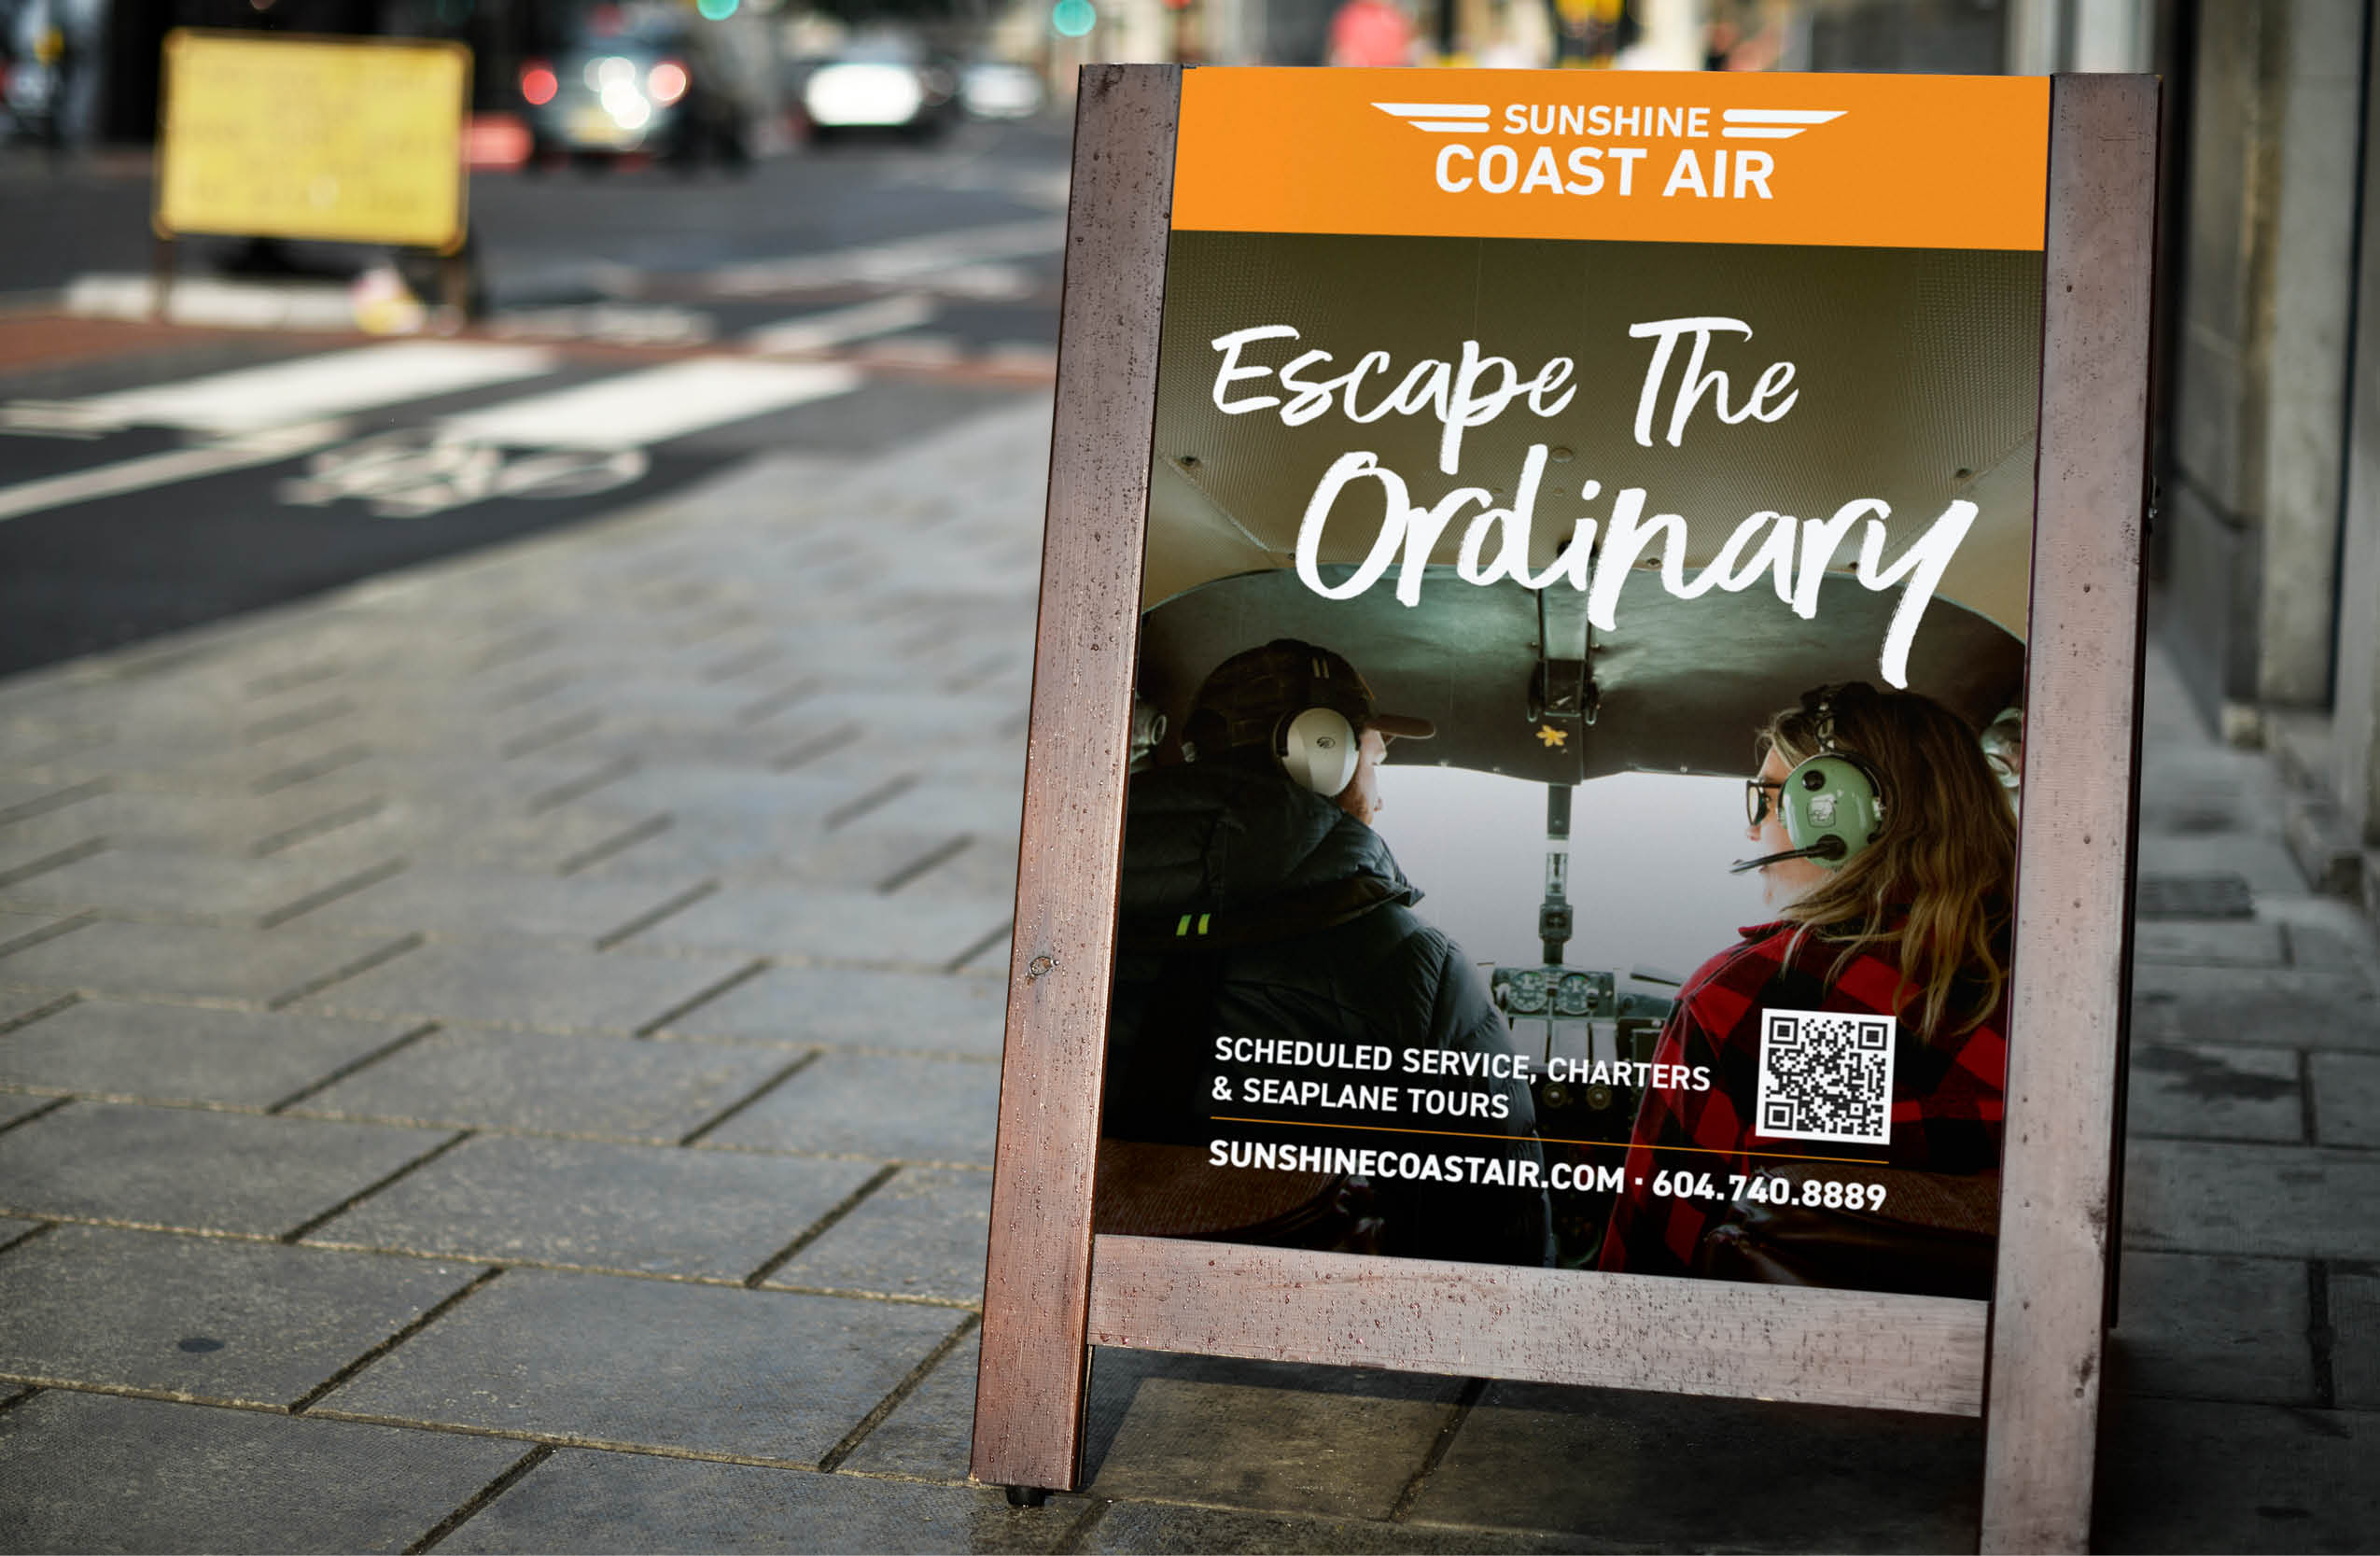 Sunshine Coast Air Sandwich Board for service, charters and seaplane tours